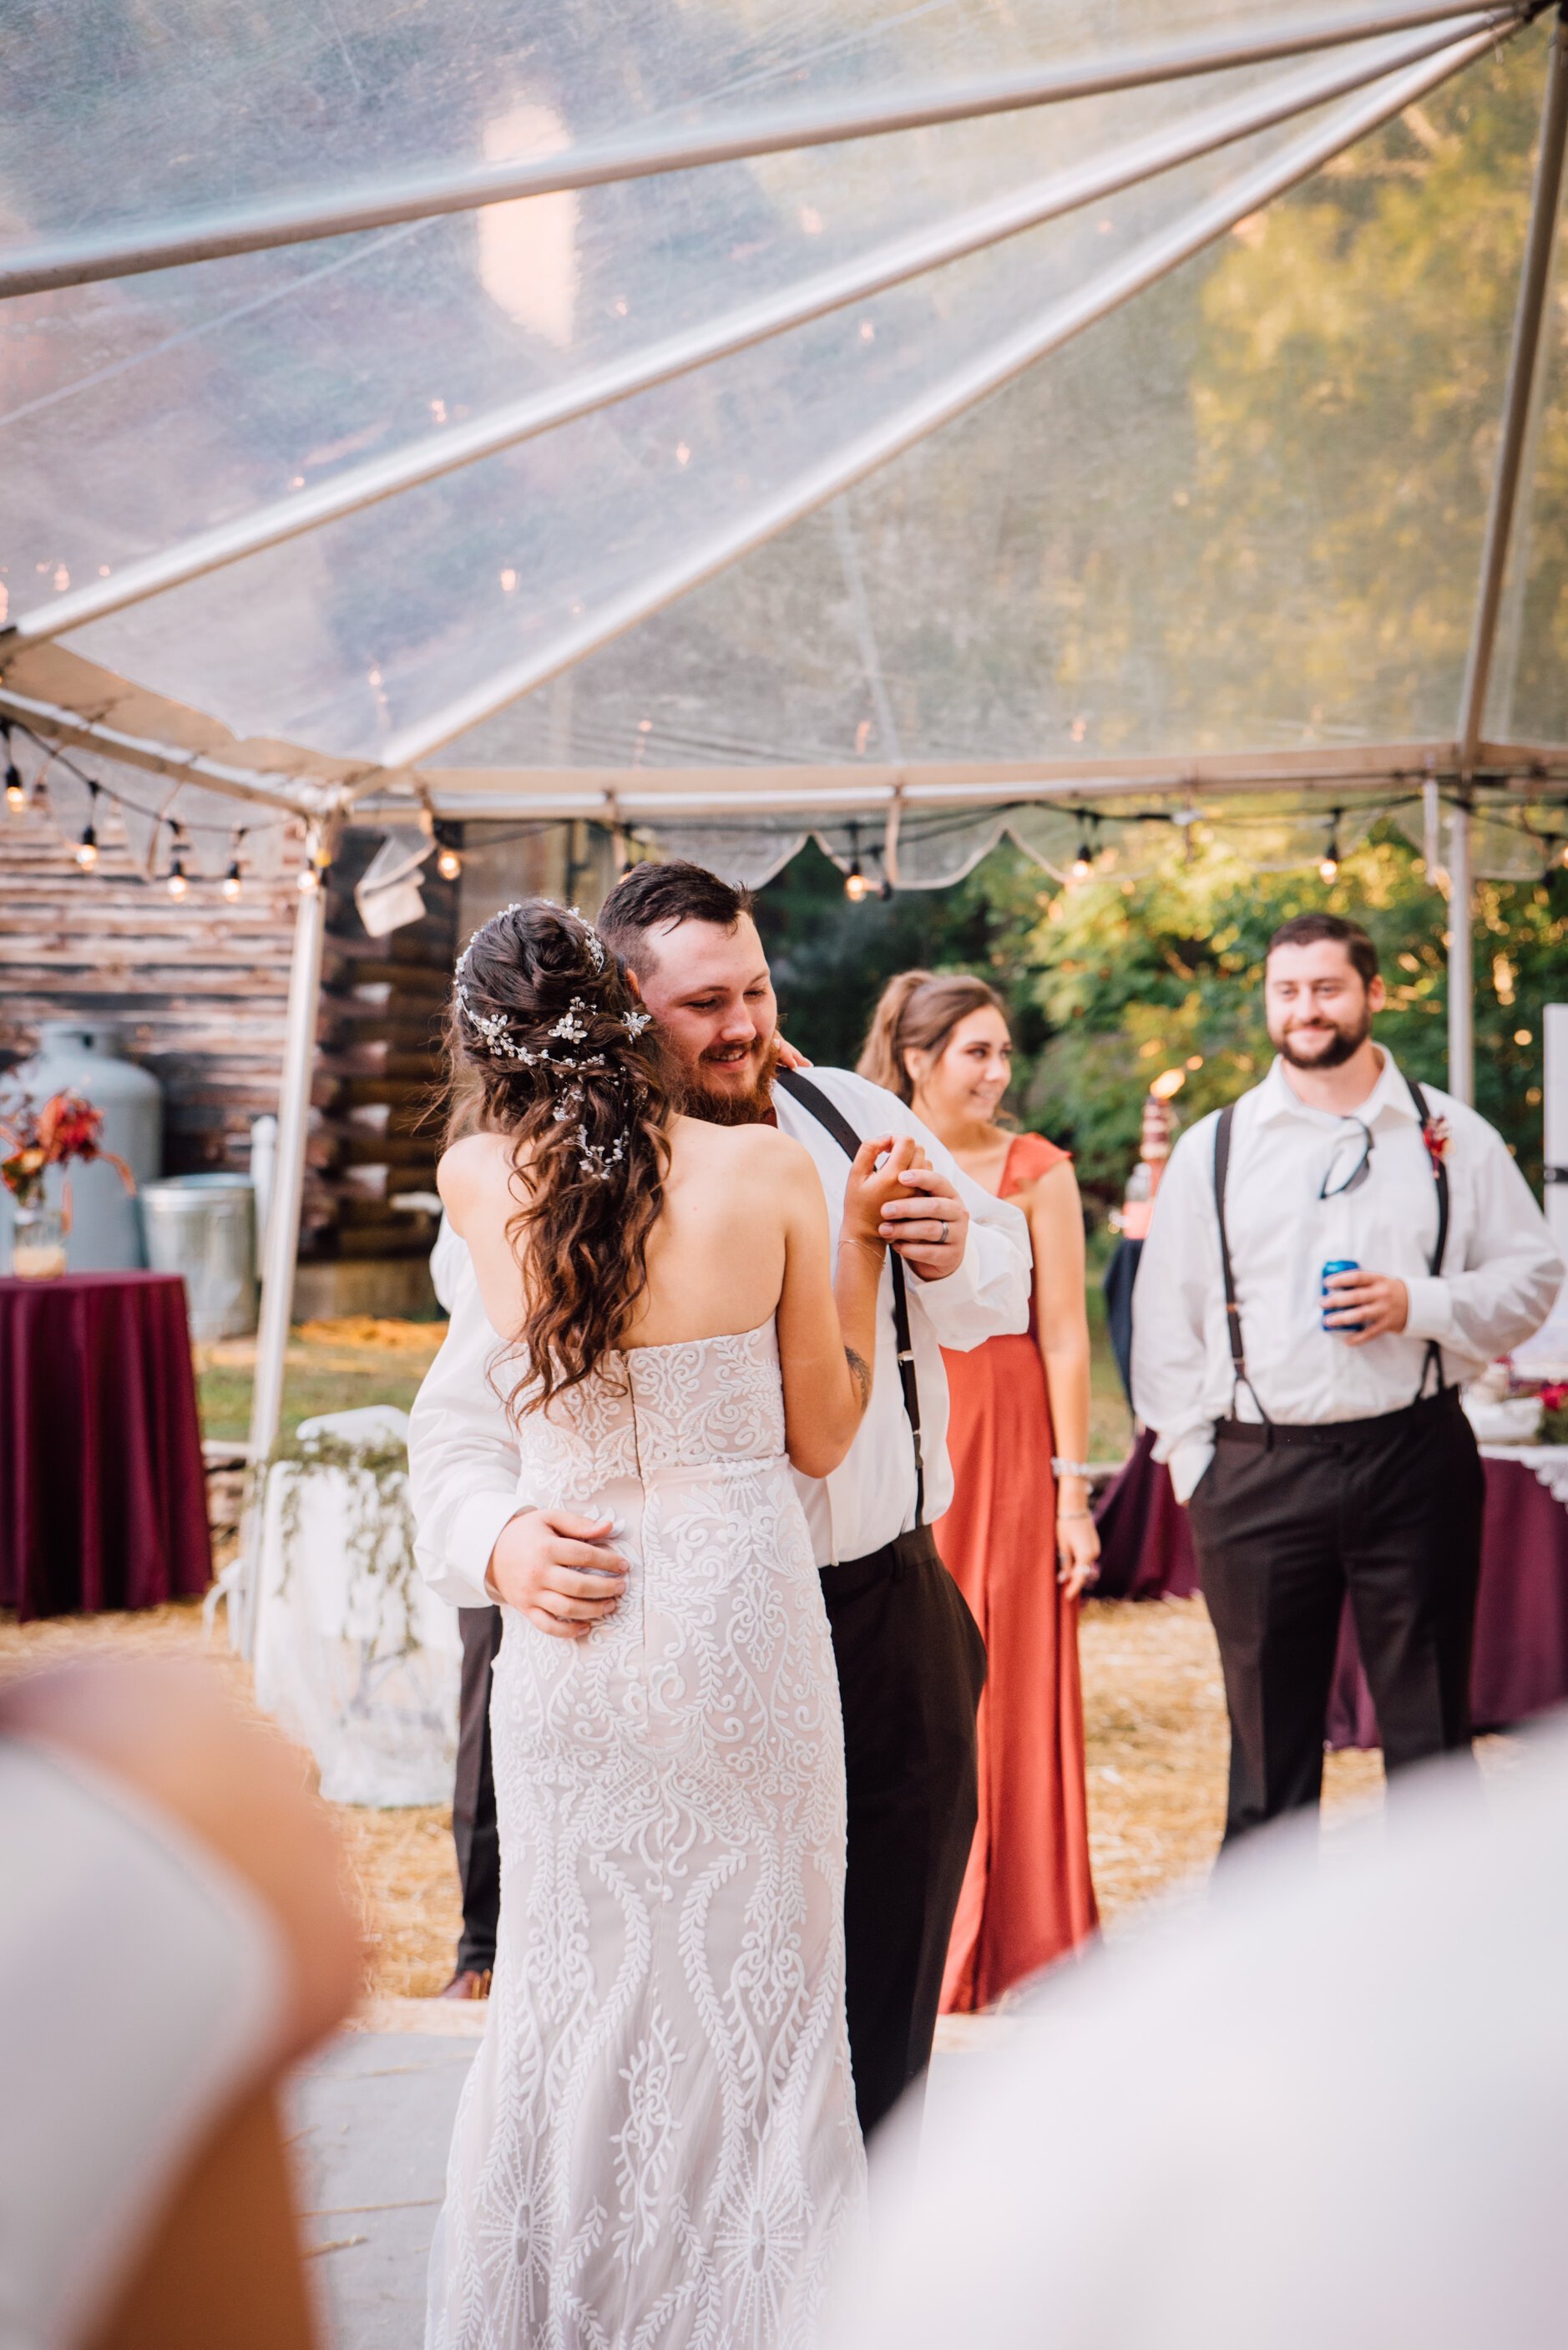  The bride and groom share their first dance at their outdoor fall wedding 